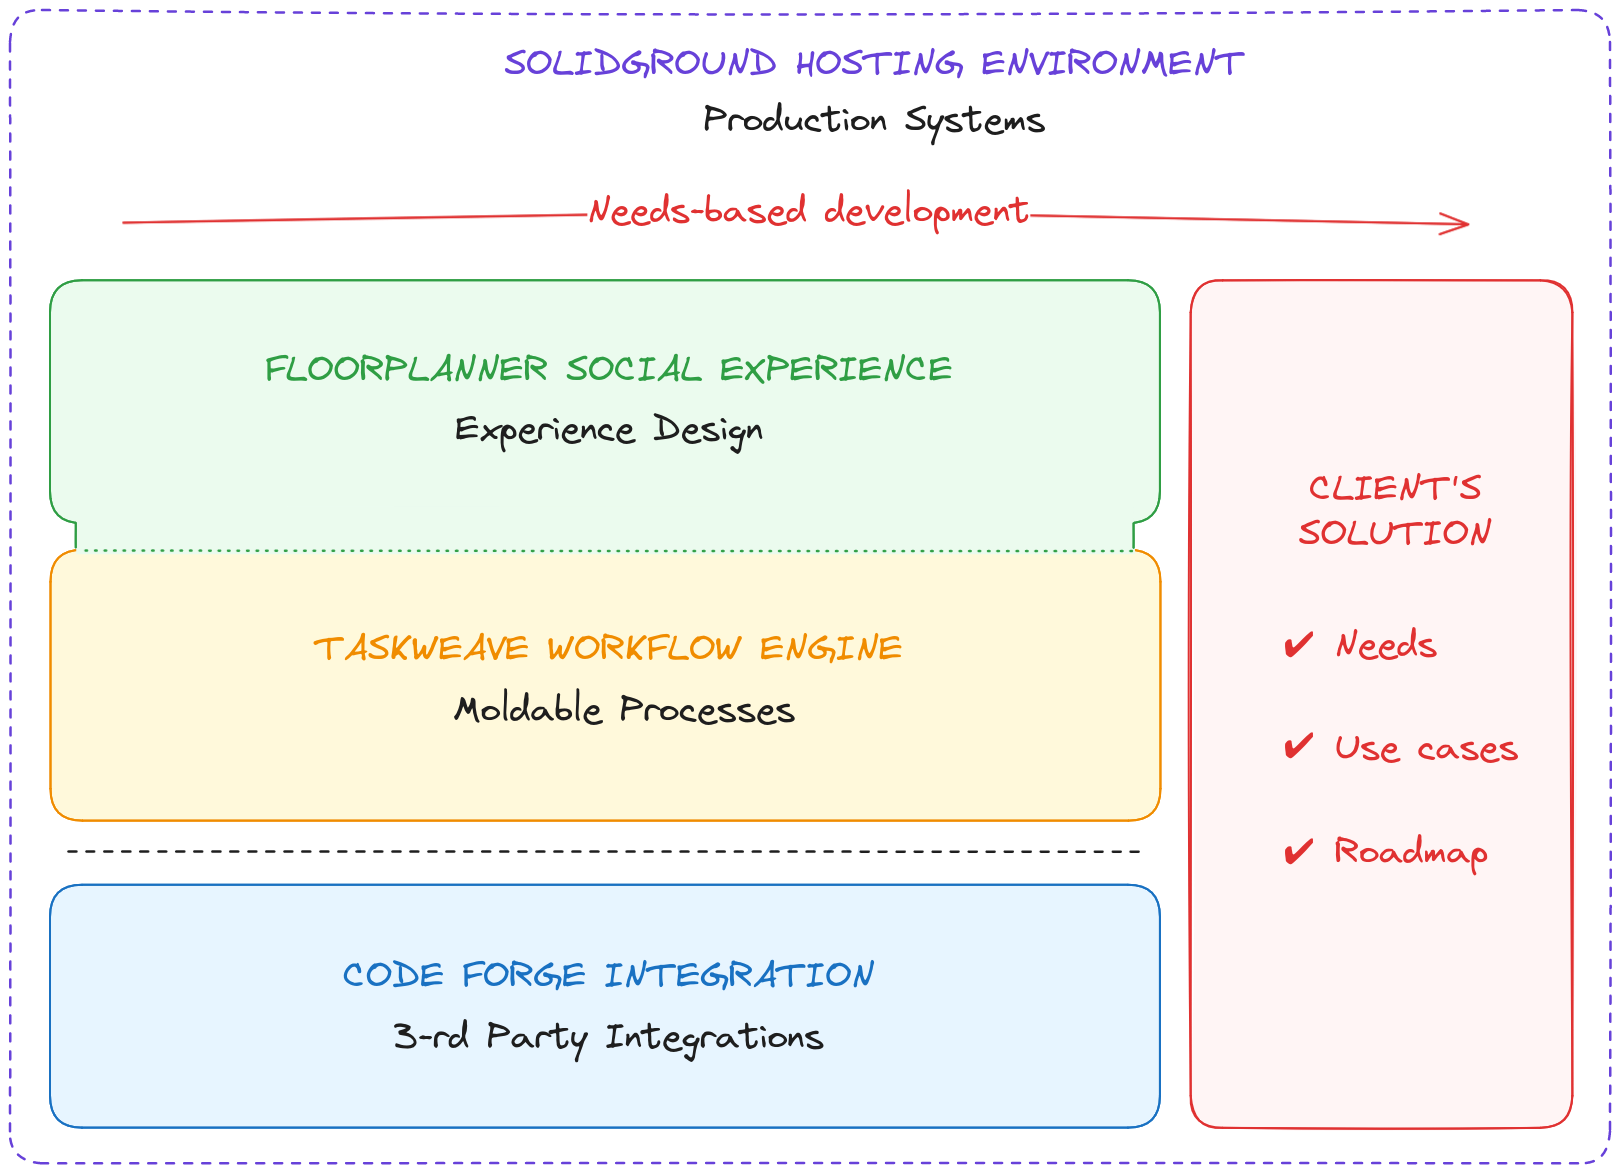 Diagram that shows a conceptual overview of the Solidground tool suite. On the right are three blocks.
    From top to bottom they are Floorplanner social experience for experience design, Taskweave workflow engine
    to support moldable processes, and separated by a dotted line an example of a system integration with a
    code forge. On the right side a block depicts the Solution containing checklists for Needs, Use cases
    and Roadmap plans